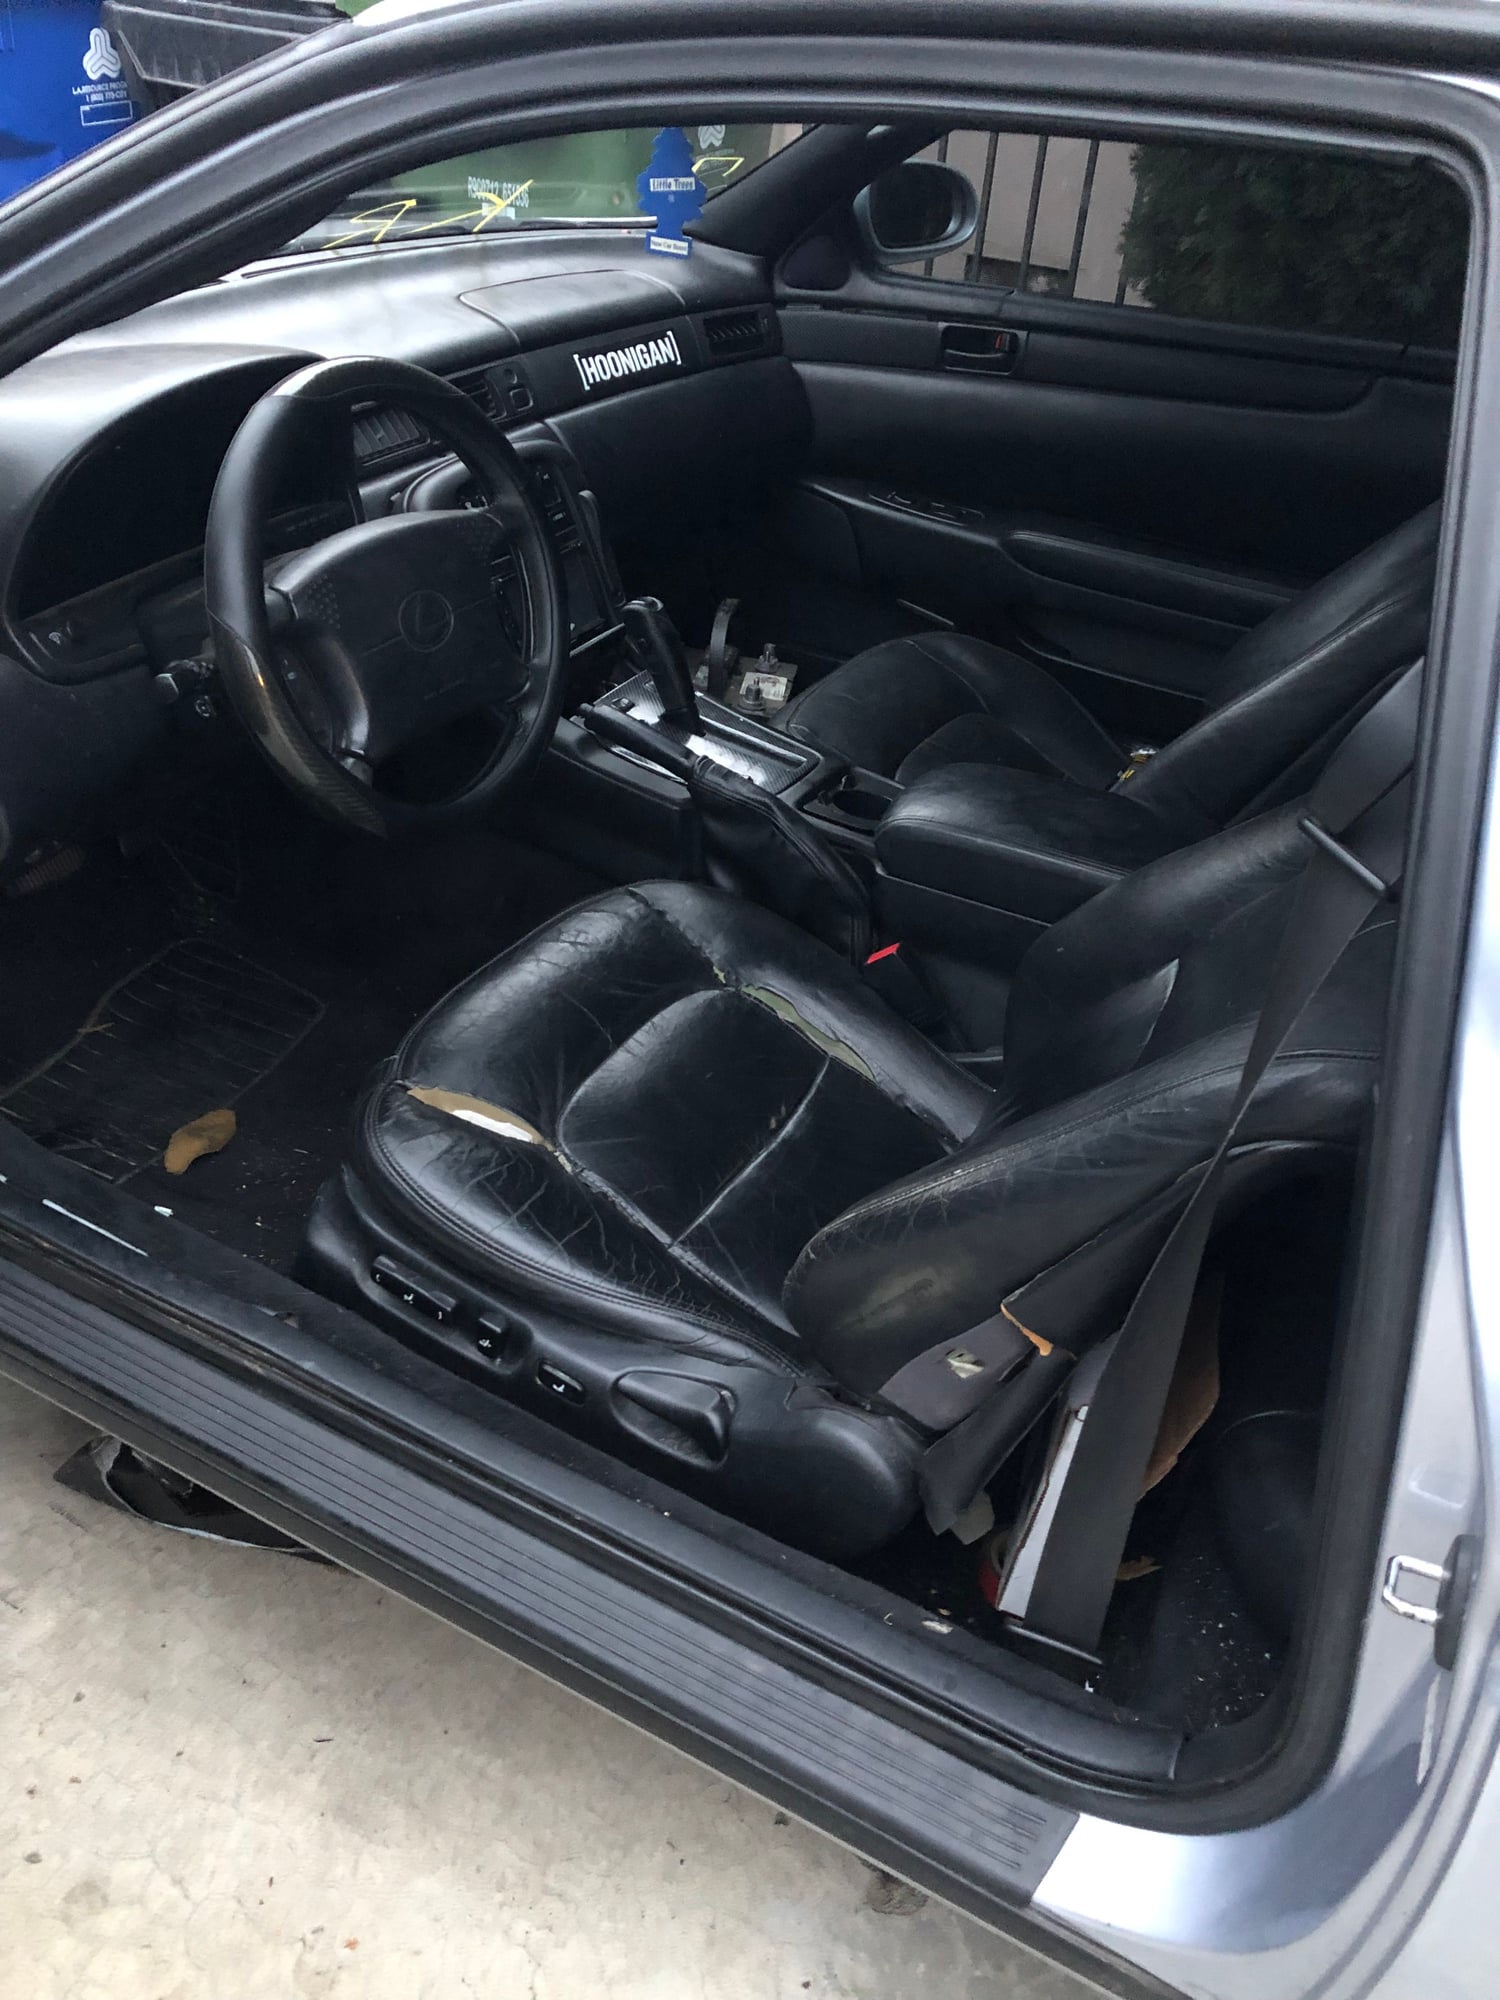 1995 Lexus SC300 - 1995 SC300 Needs TLC - Used - VIN JT8JZ31CXS0031102 - 273,649 Miles - 6 cyl - 2WD - Automatic - Coupe - Silver - Los Angeles, CA 91306, United States